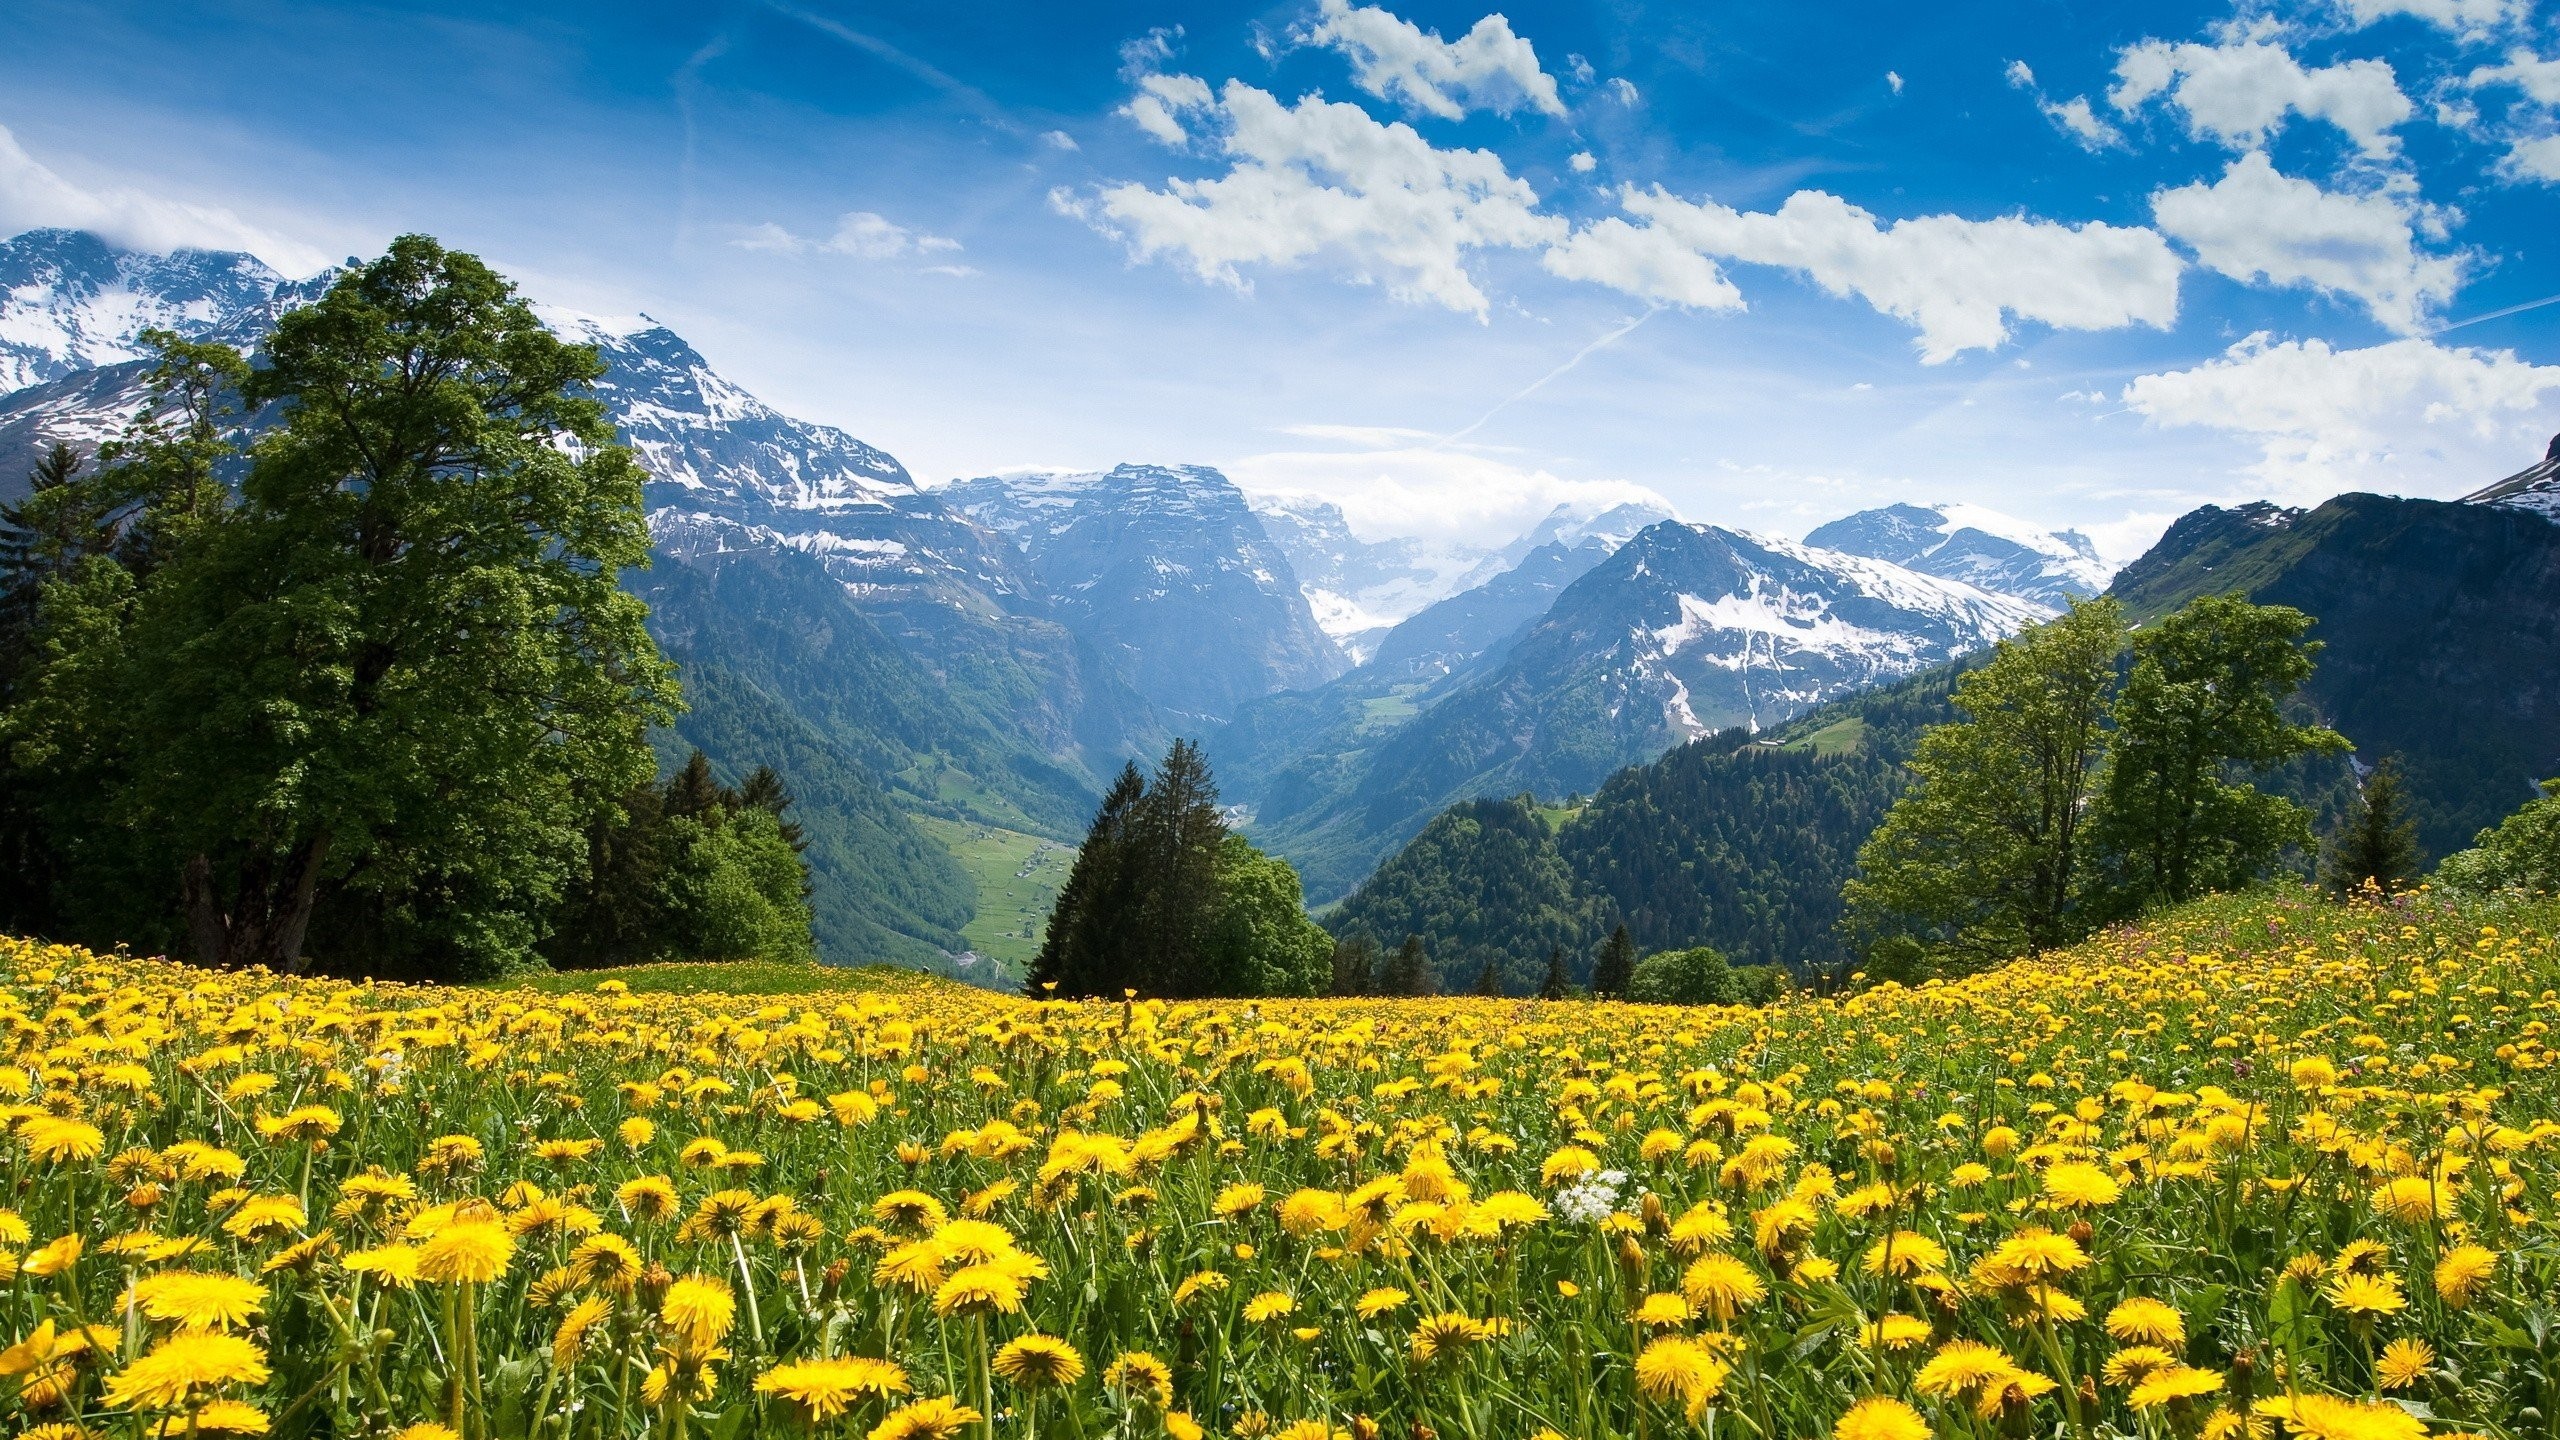 Mountains, Landscape, Nature, Mountain, Spring, Meadow